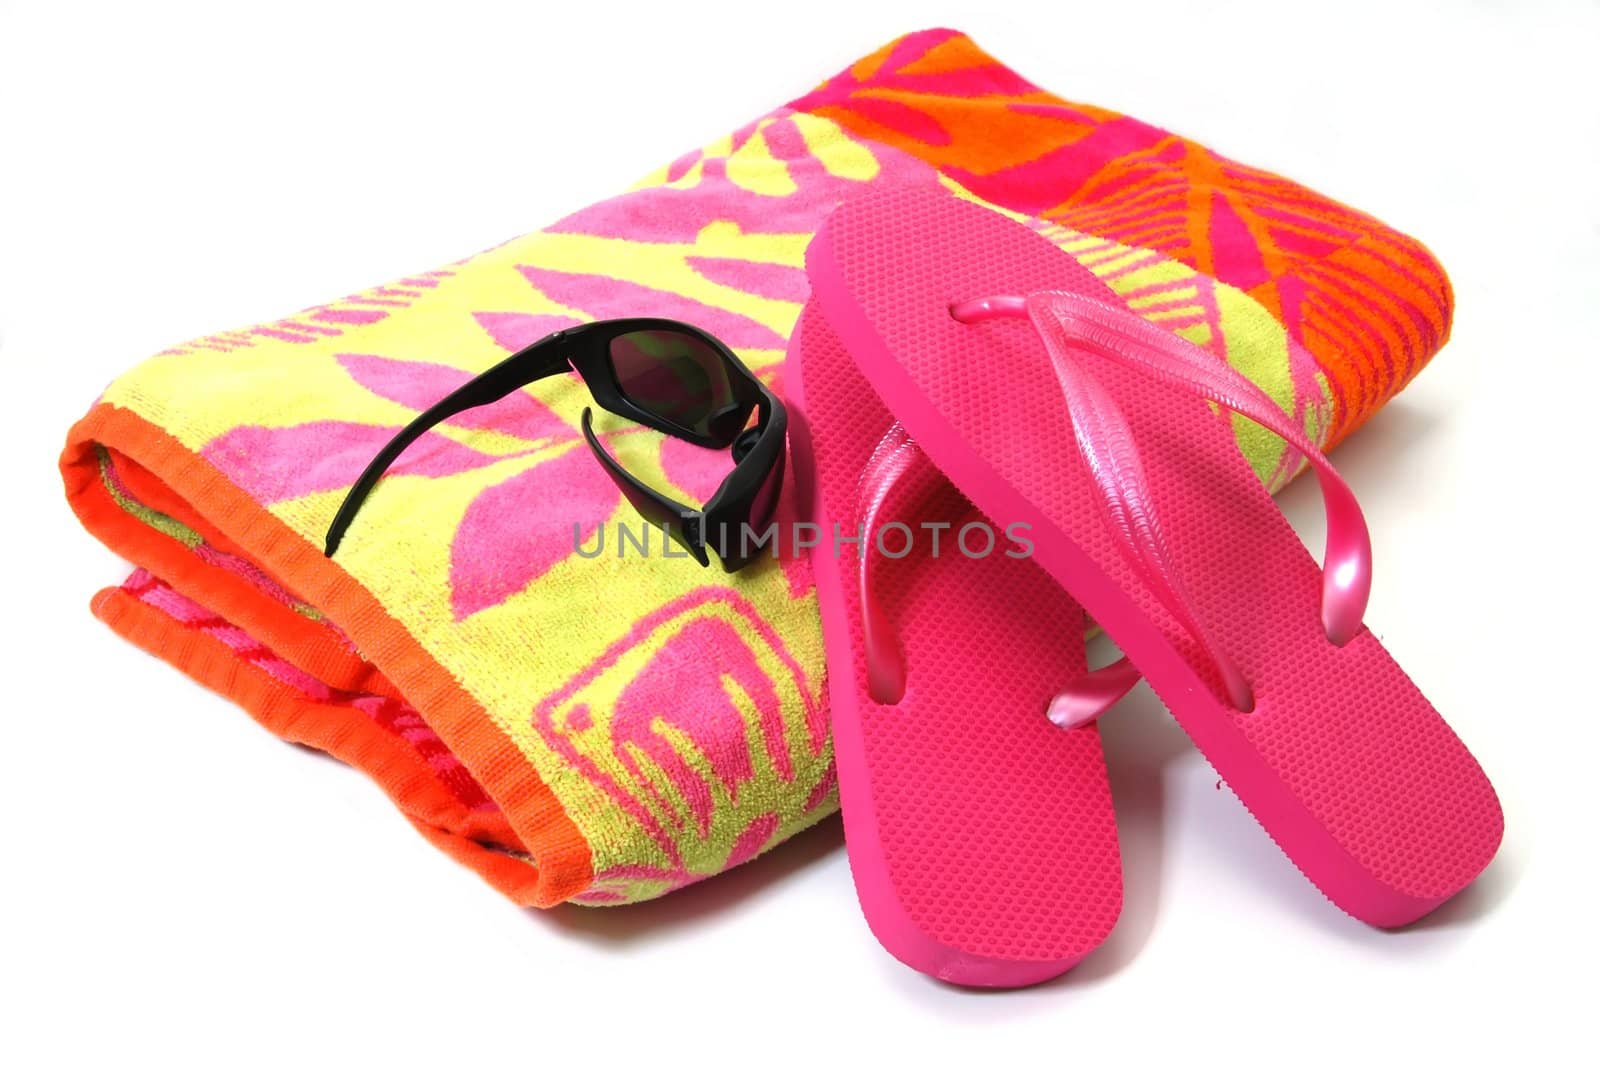 Beach towel, flip flops, and sunglasses isolated on white background.